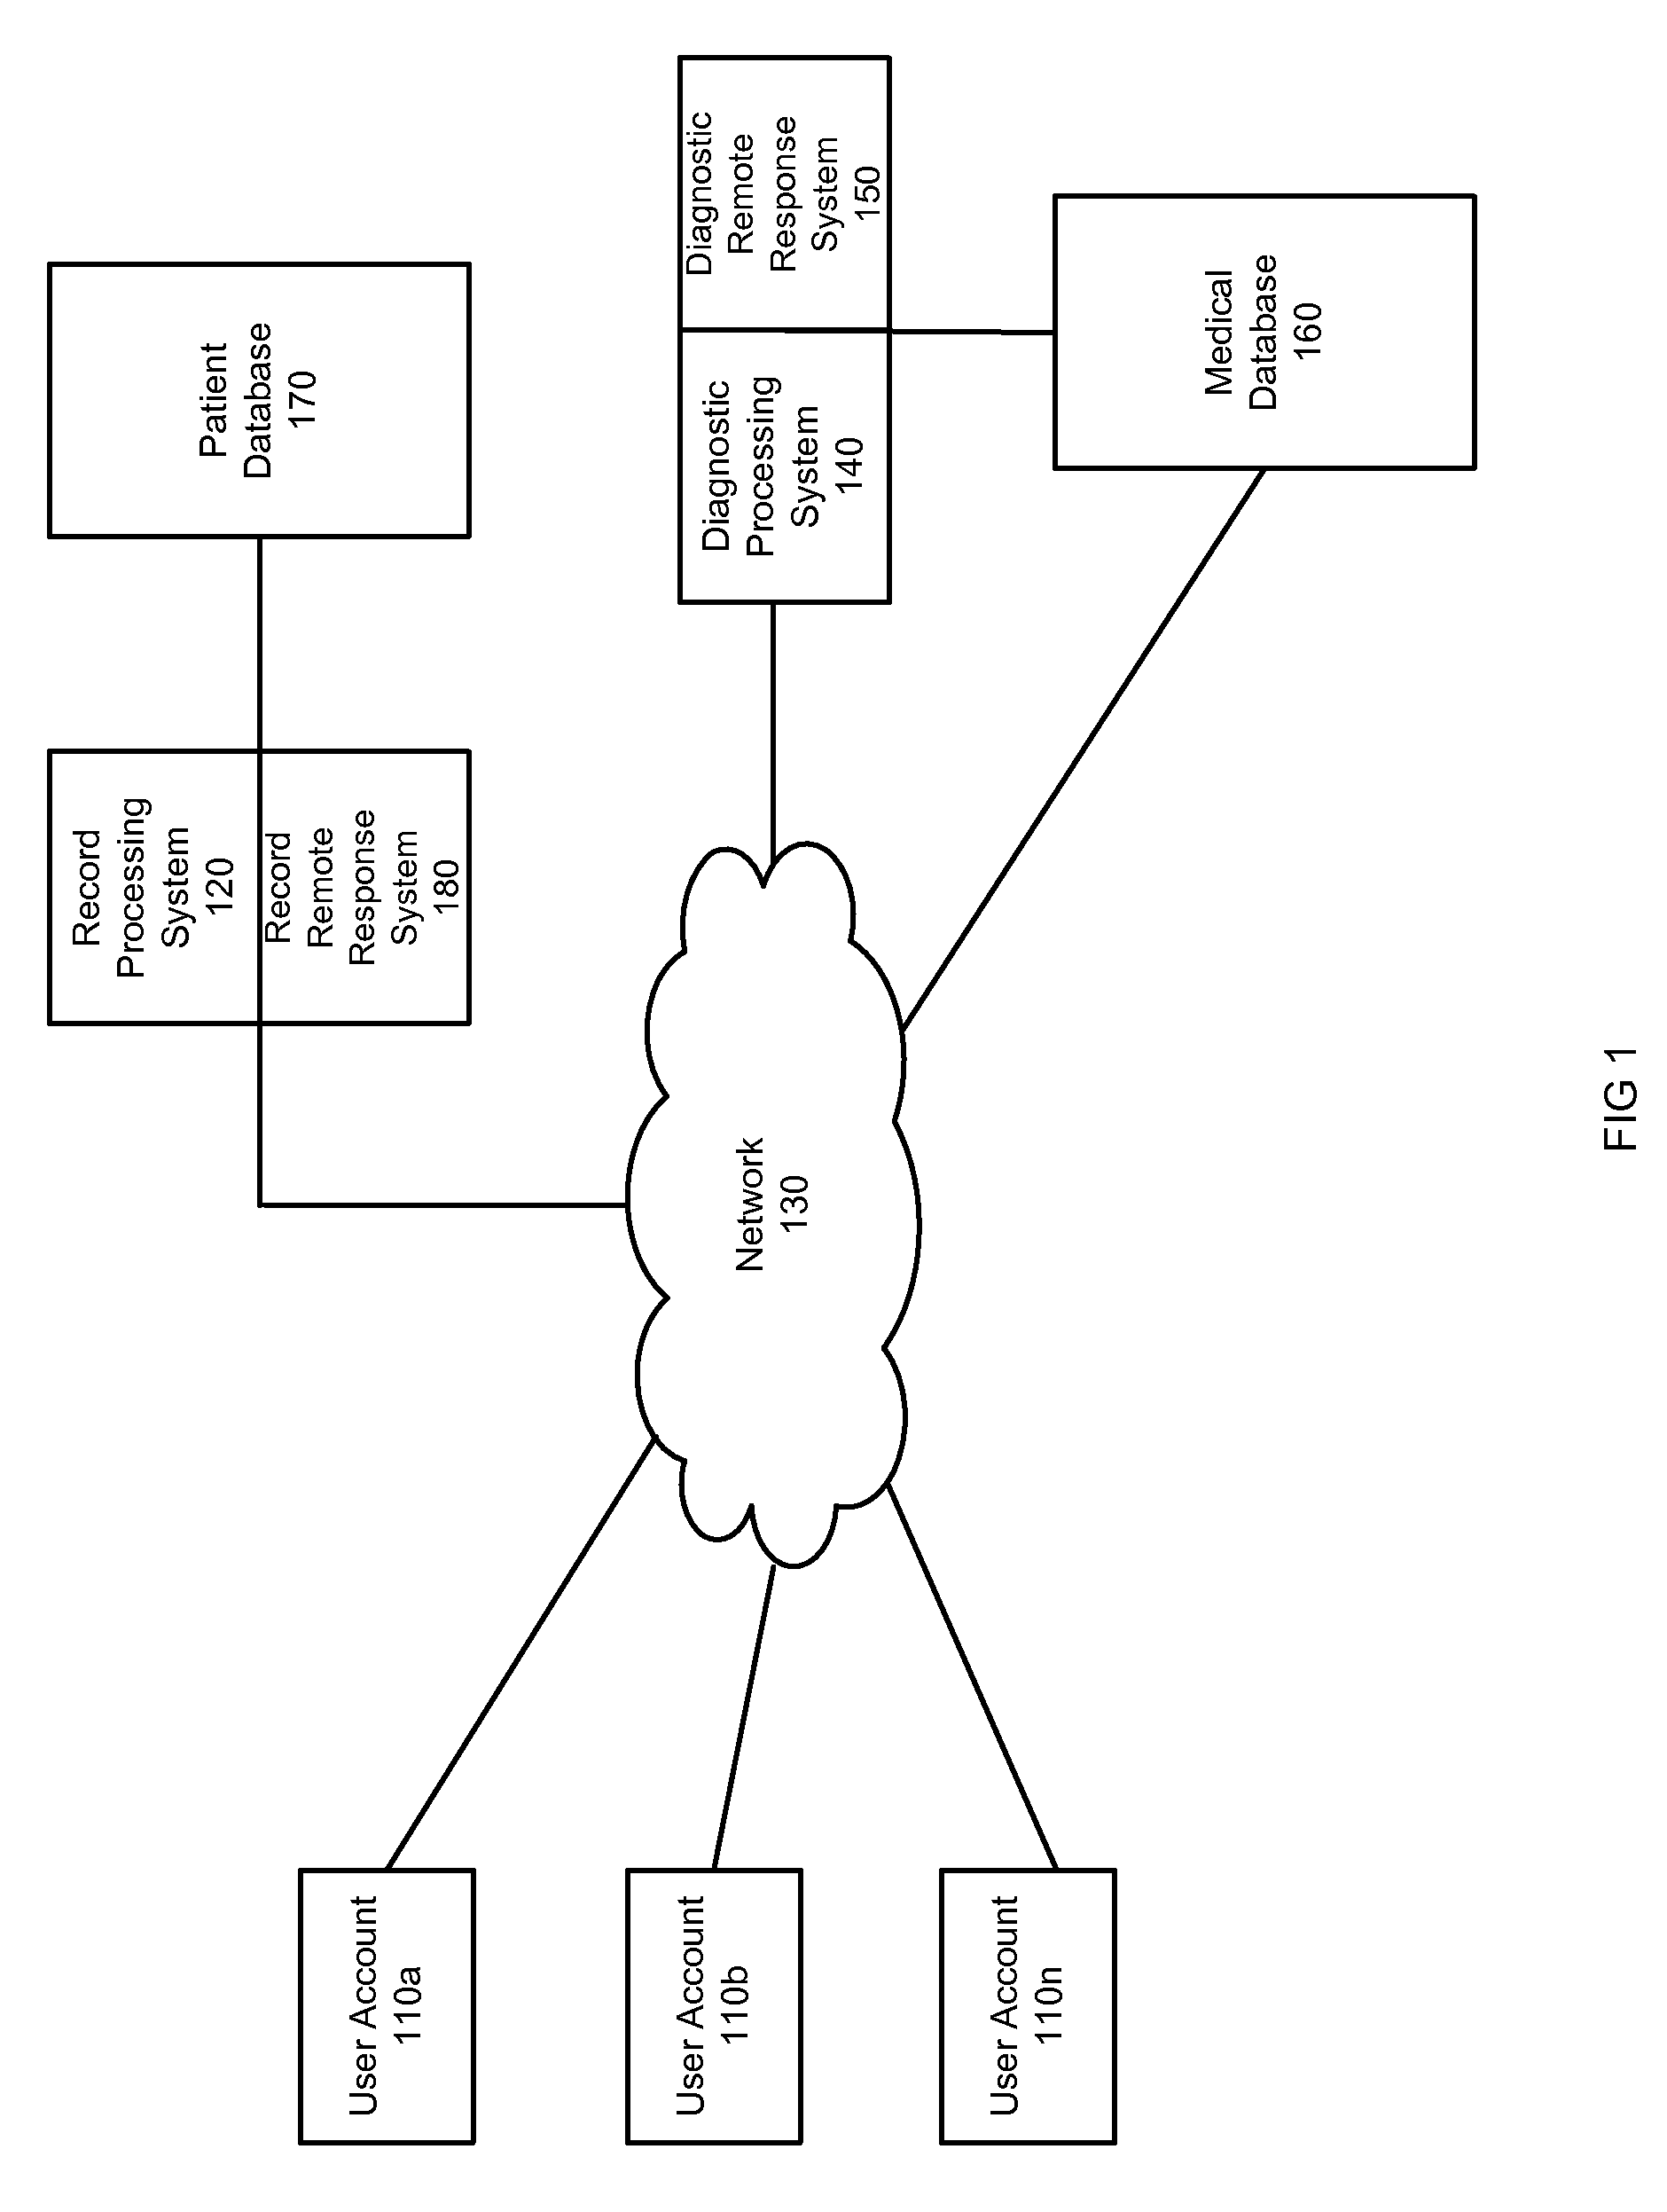 System and method for implementing a diagnostic software tool